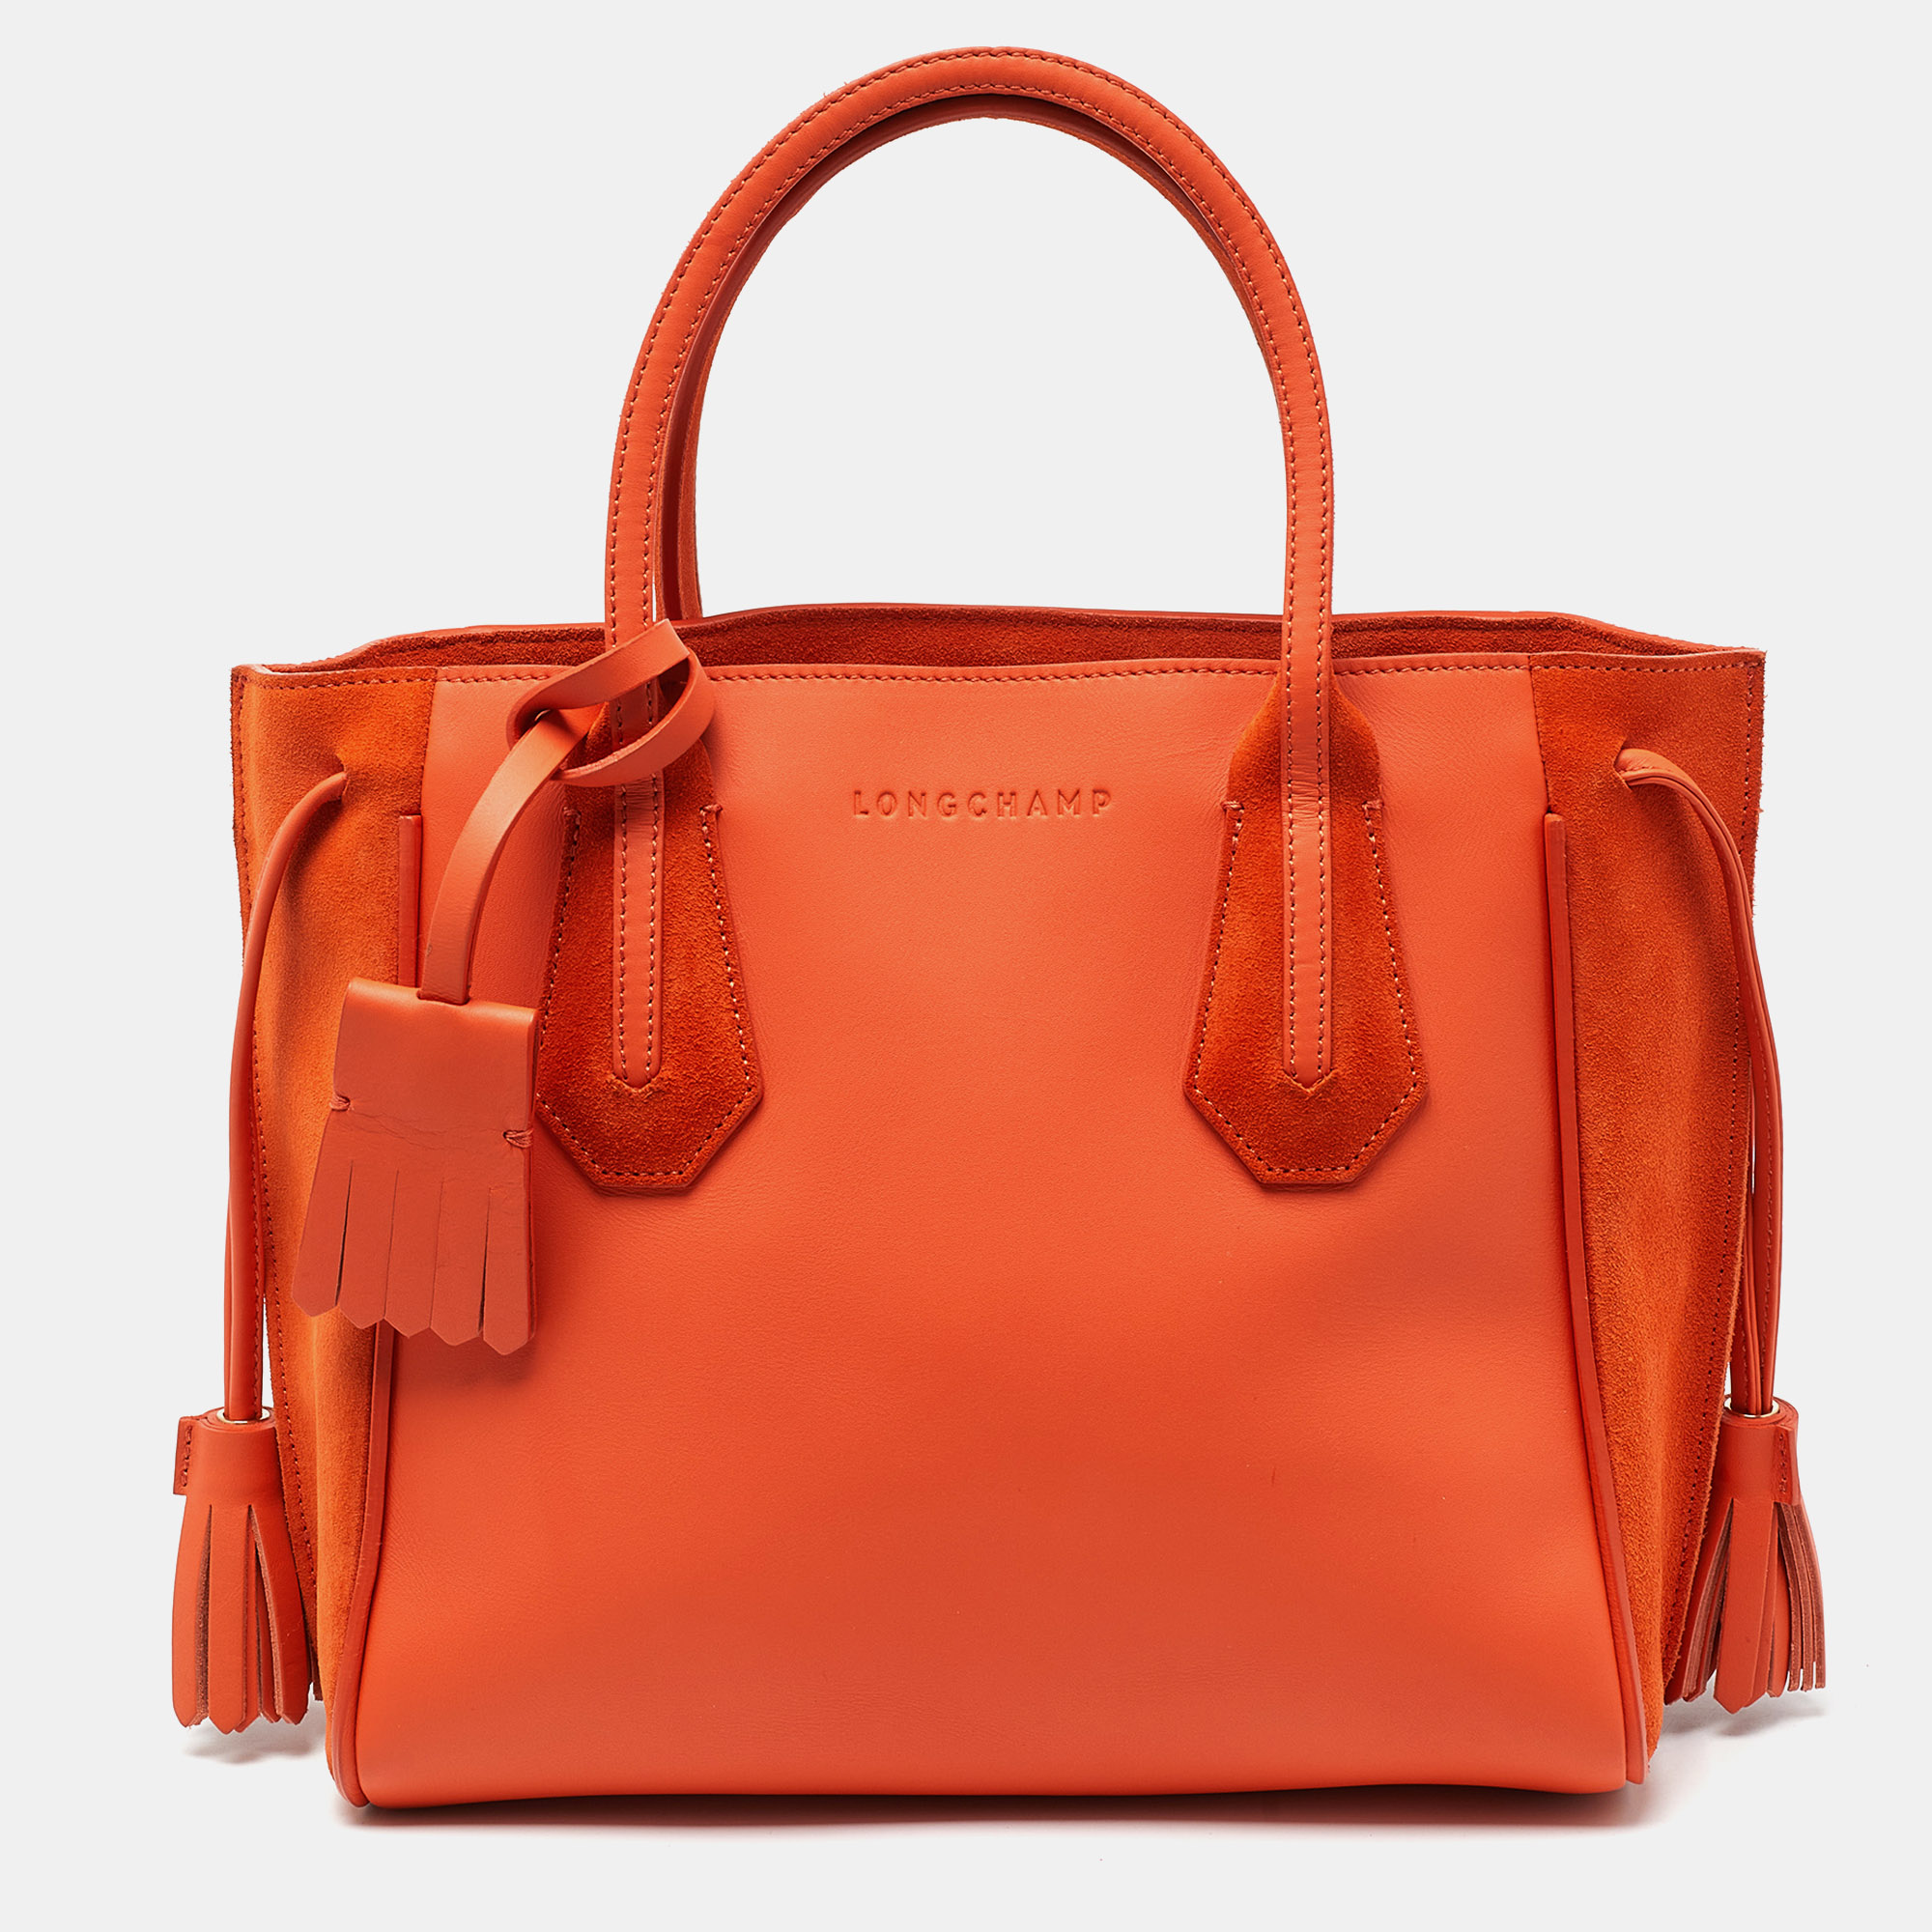 Longchamp orange leather and suede small penelope fantasie tote